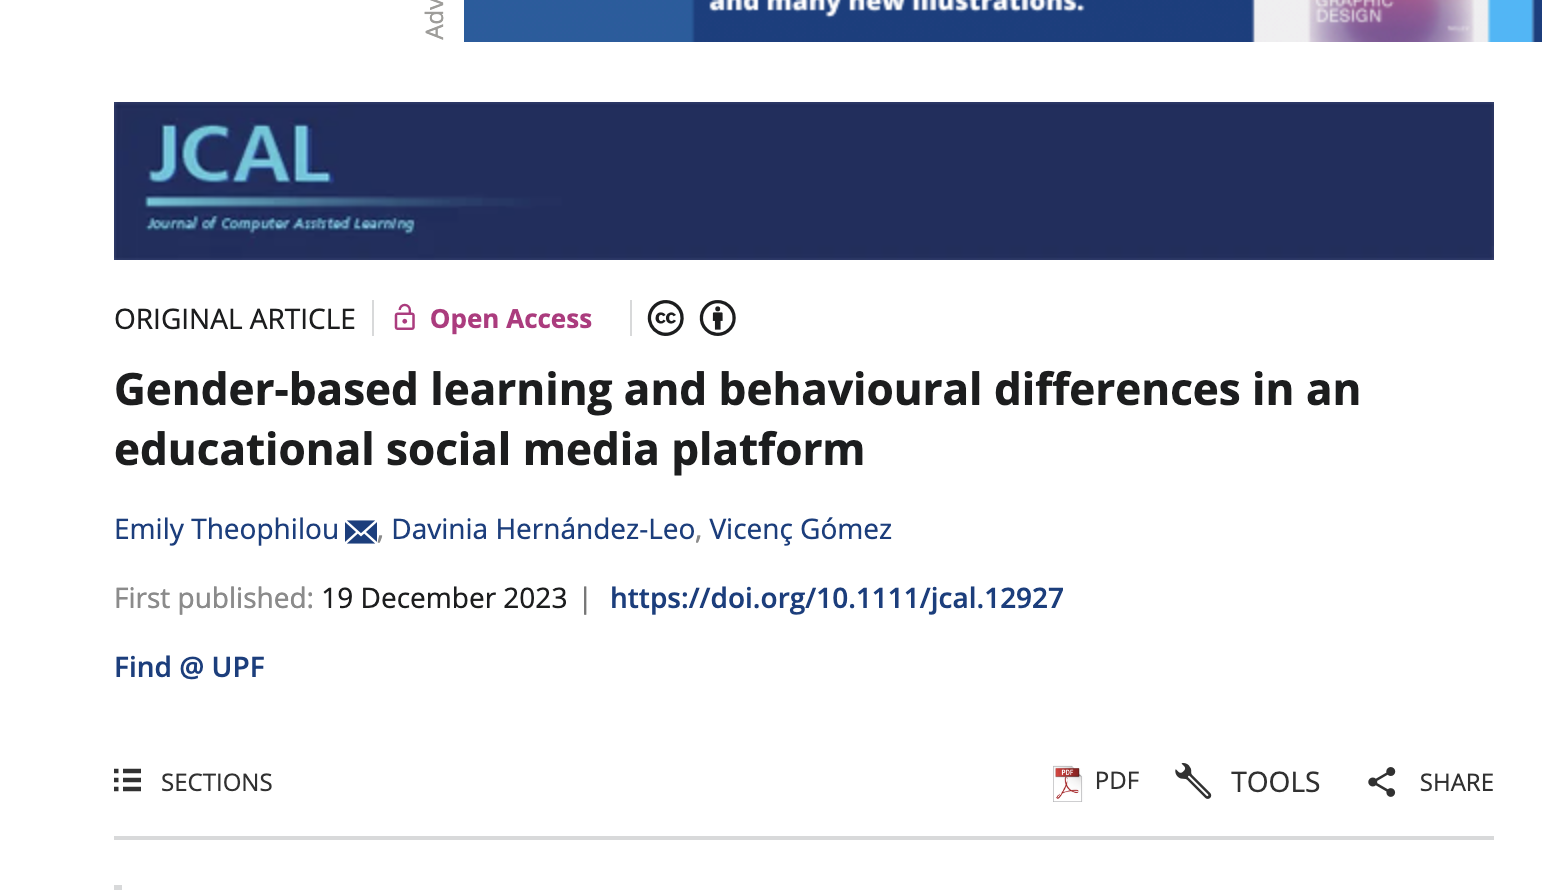 Just published at JCAL: Gender-based learning and behavioural differences in an educational social media platform